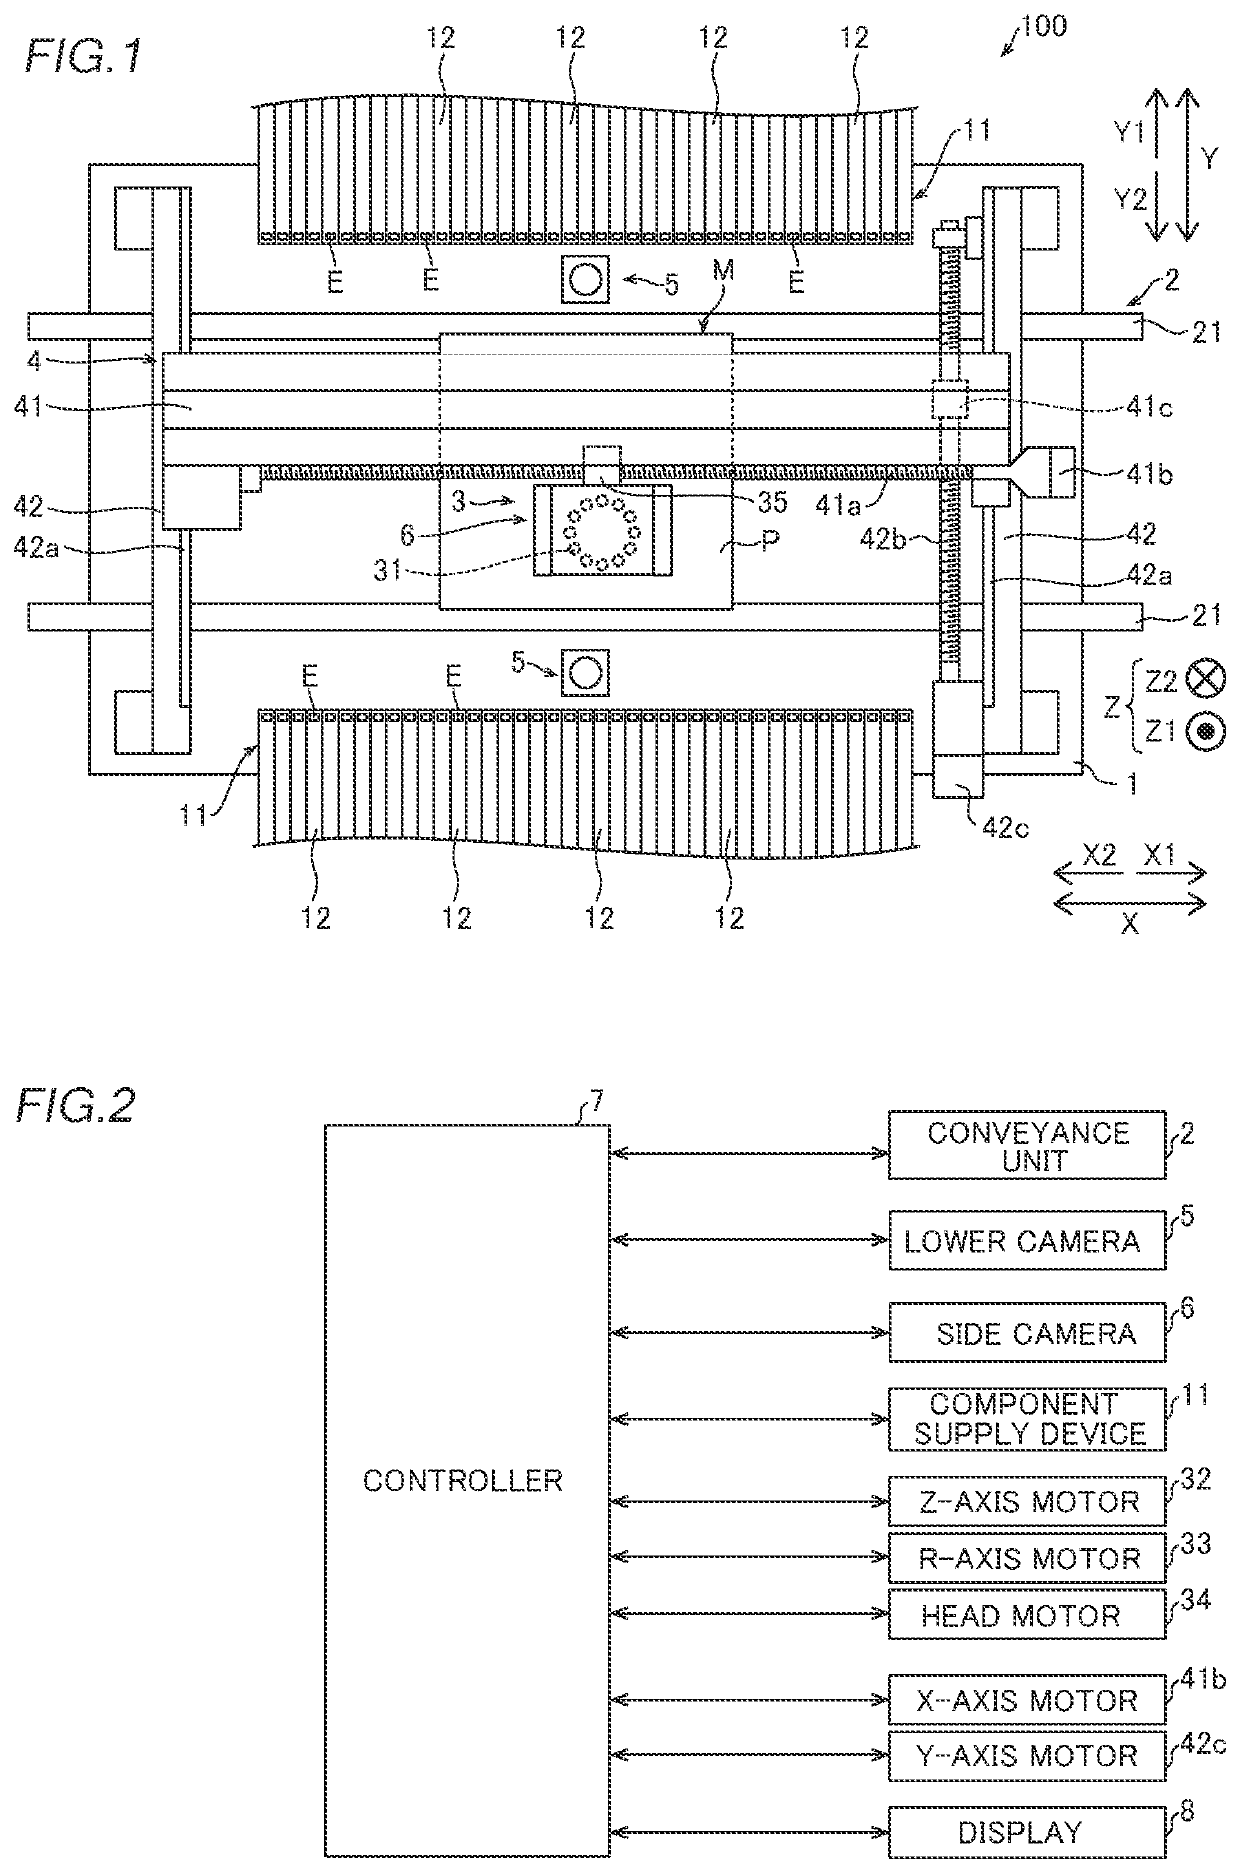 Component mounting device